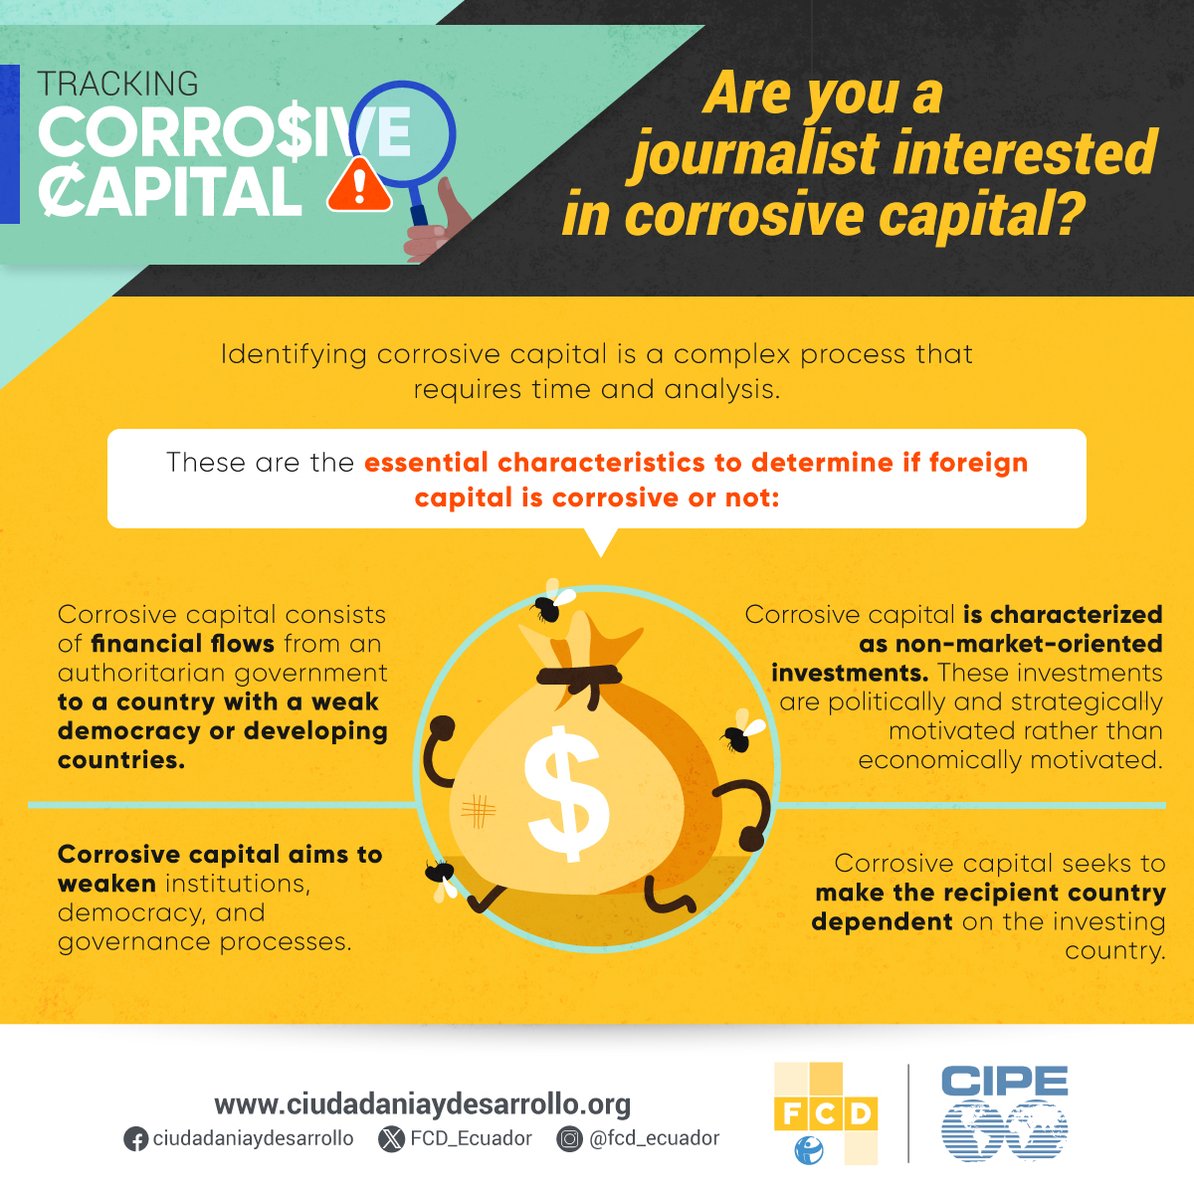 Are you a journalist interested in corrosive capital (foreign investments stemming from authoritarian countries) in Latin America? Check out @FCD_Ecuador and @cipe_lac’s new guide: bit.ly/3IzOoQb #LatinAmerica